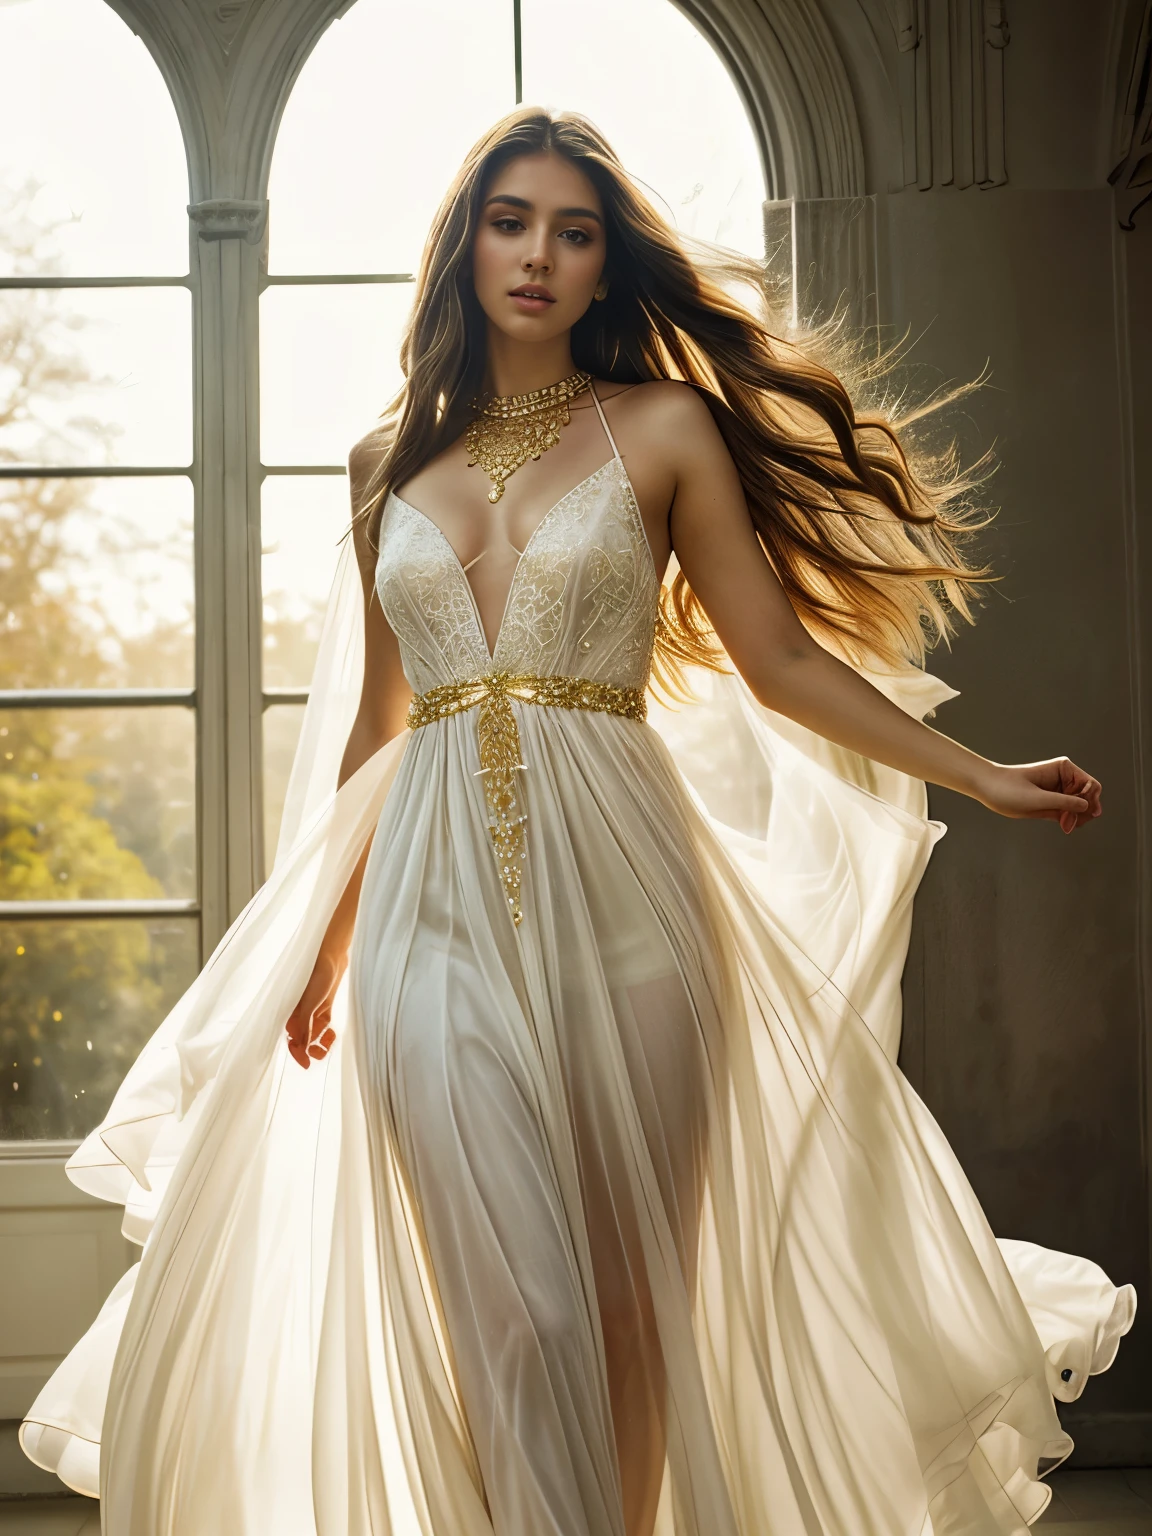 Ethereal high fashion portrait, ((full body portrait)), ethereal glowing model walking, beautiful eyes and face, detailed skin, Angelic gold and white dress, floating chiffon, delicate lace details, soft focus, dreamy, golden hour lighting, wind-blown hair, Indian hair_jewellery, gemstones, subtle lens flare, mesmerizing gaze, minimalist background, window, understated elegance